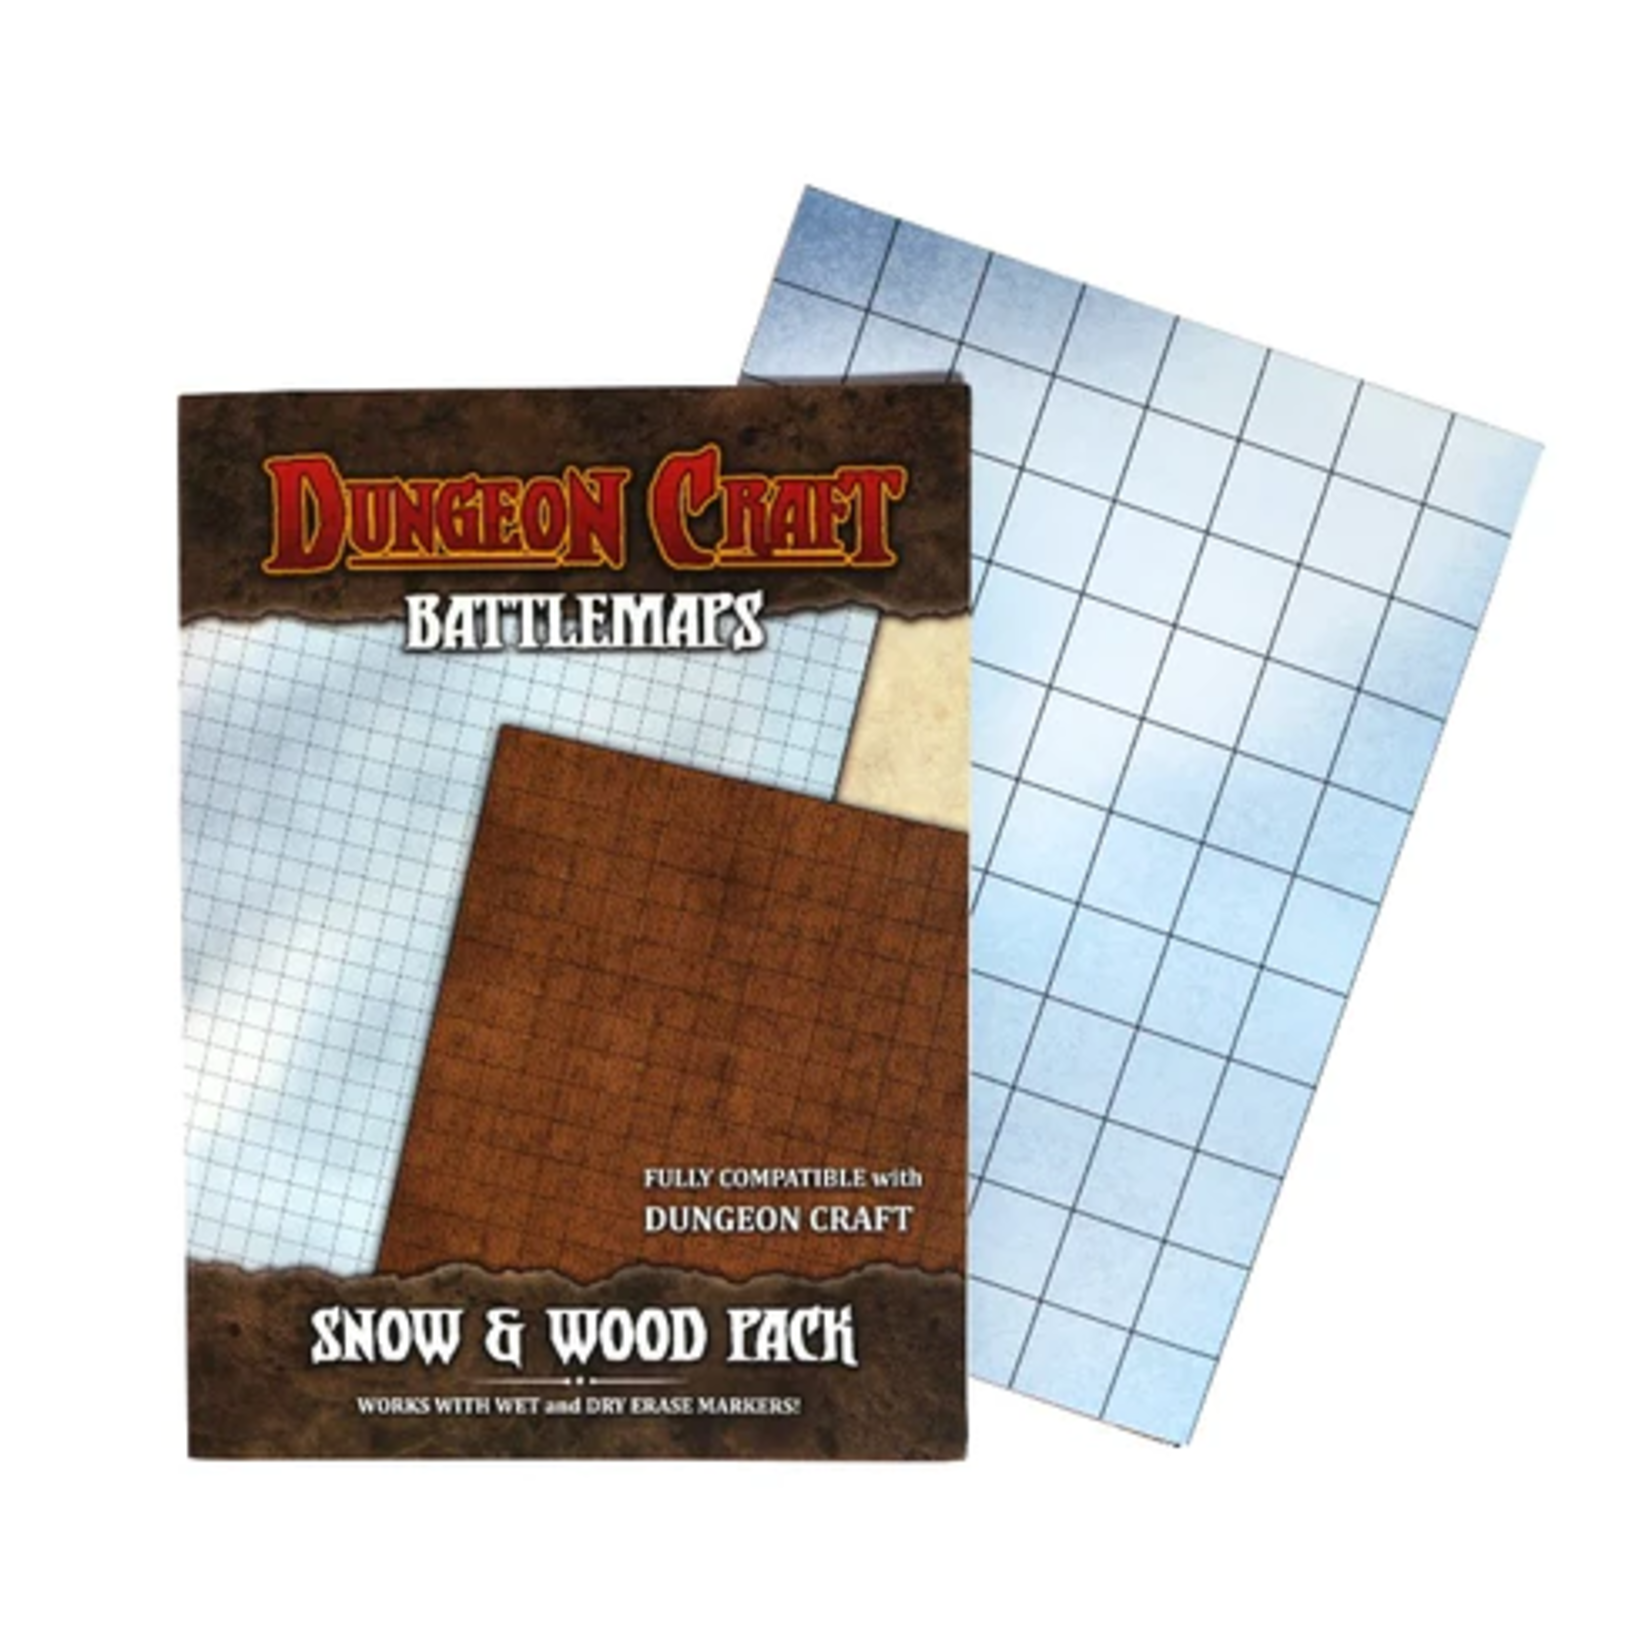 1985 Games Dungeon Craft Battle Maps Snow and Wood Pack